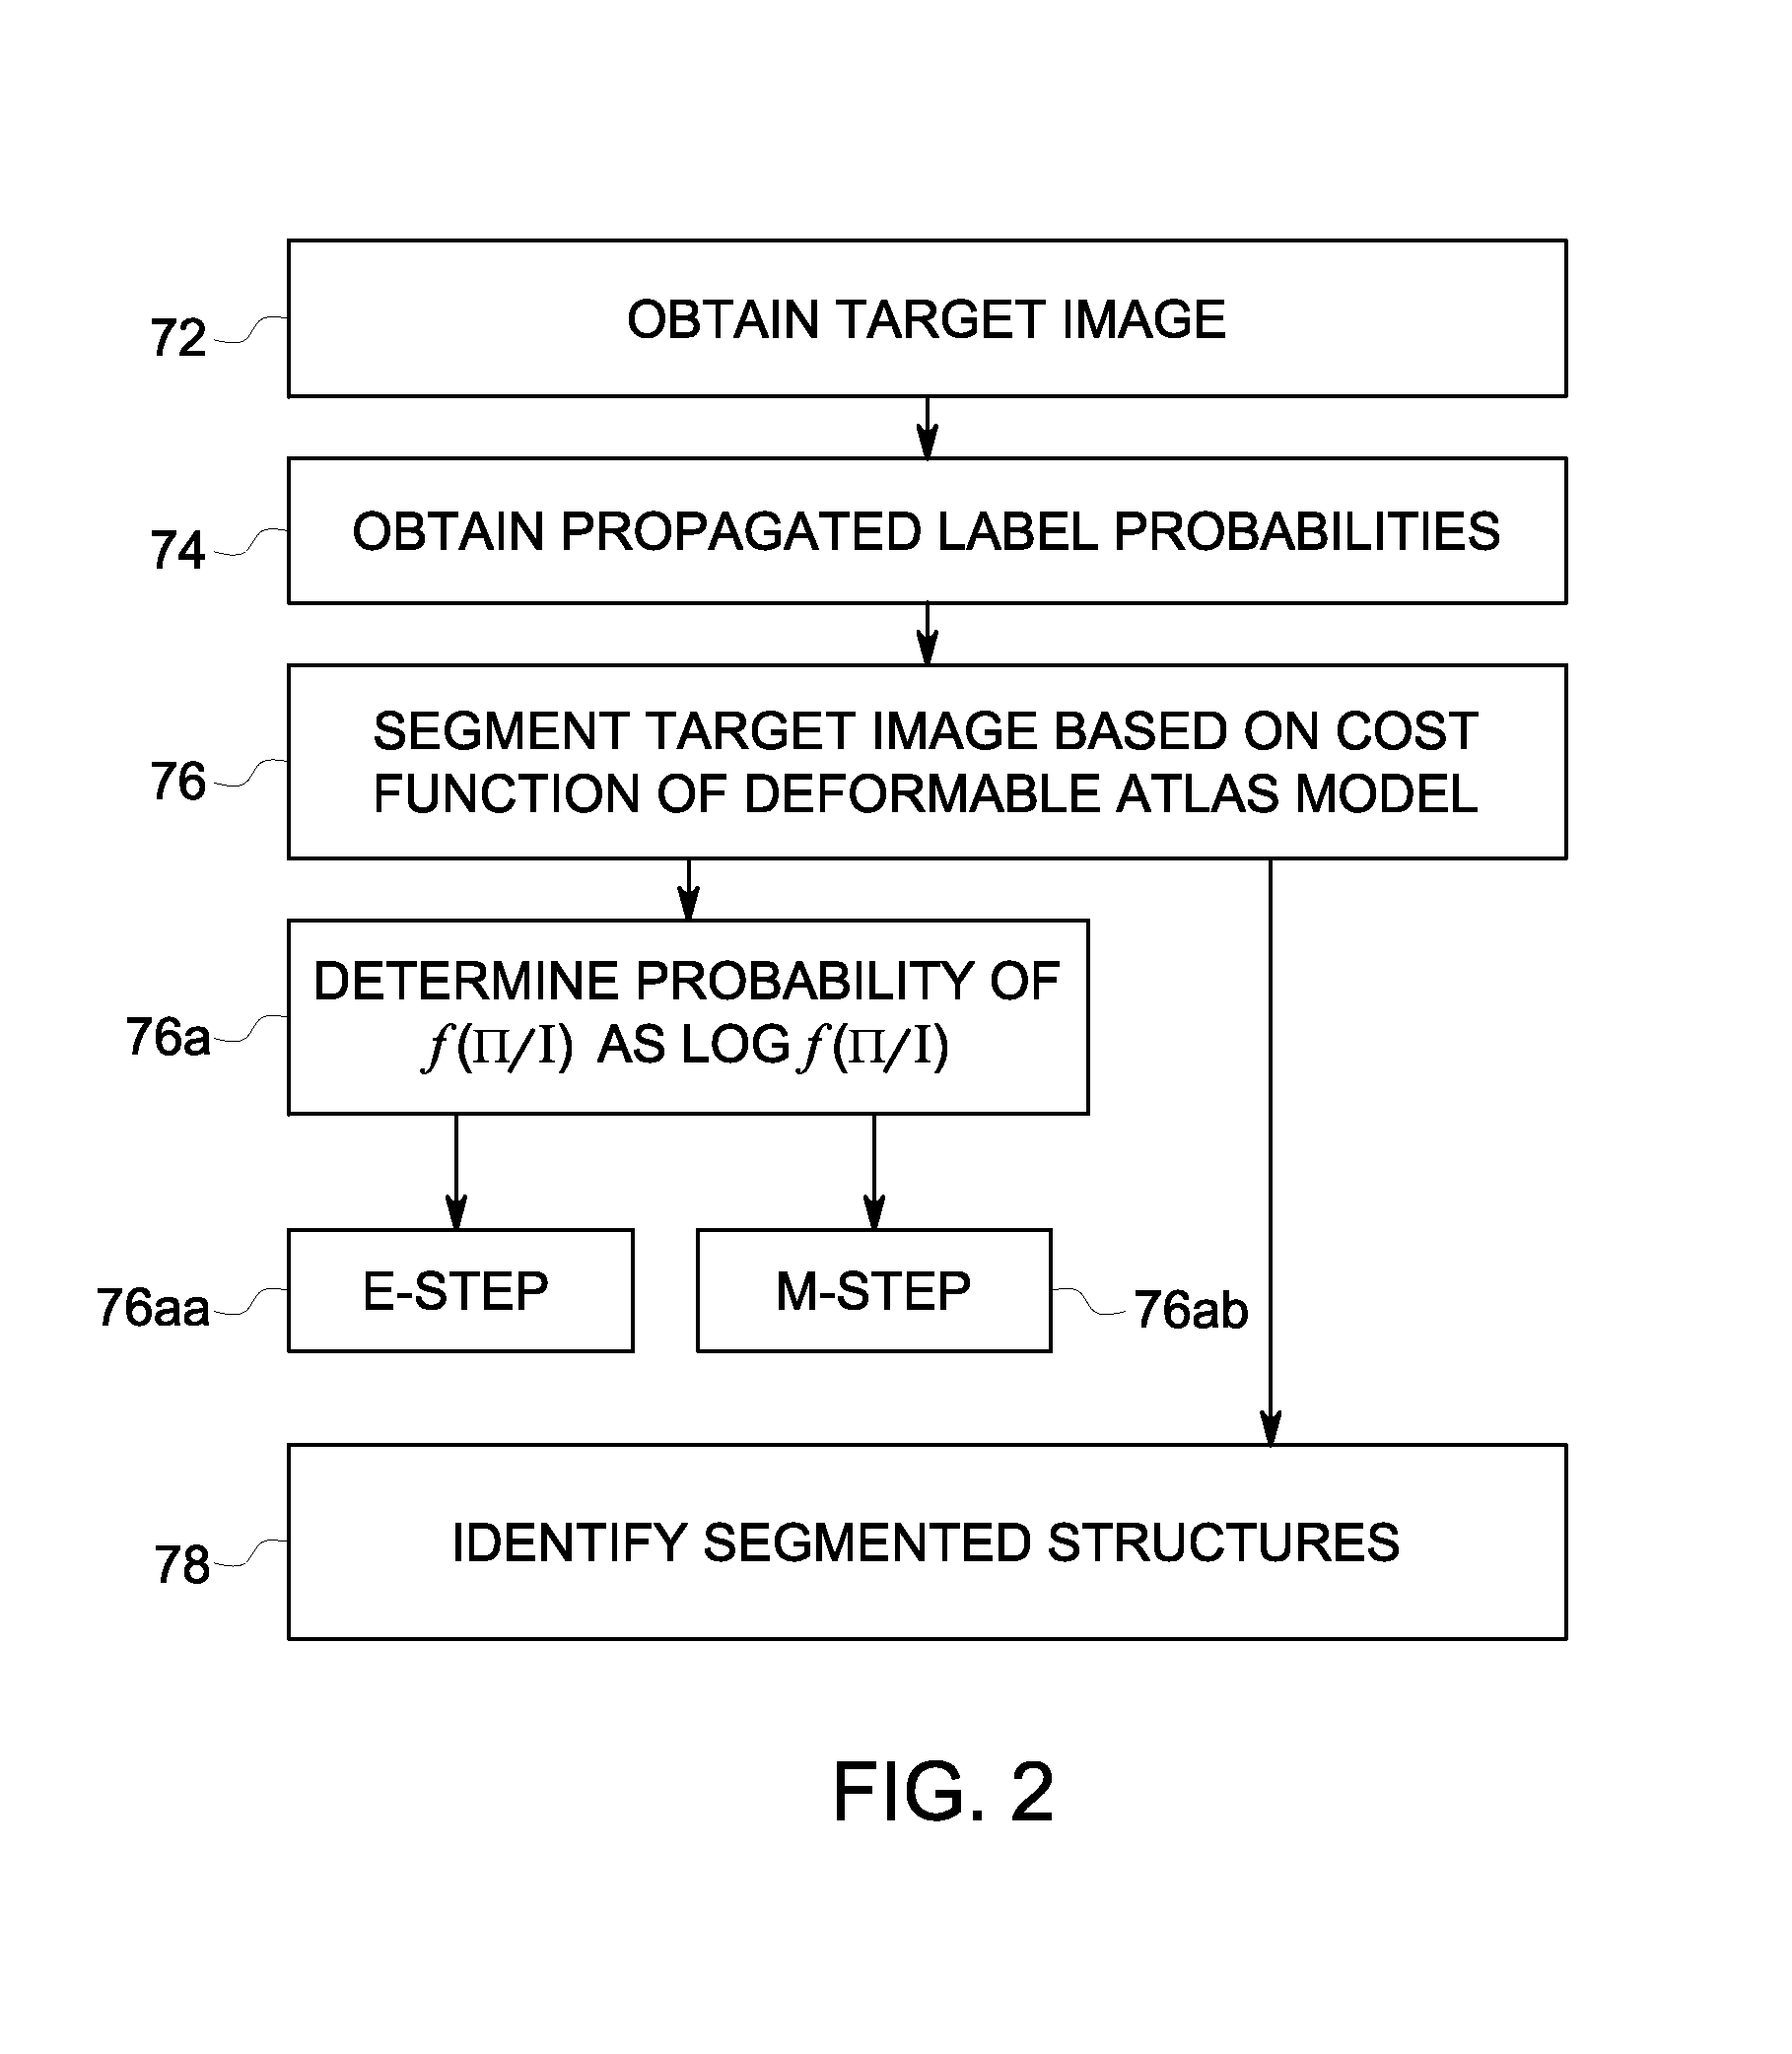 Systems and methods for image segmentation using a deformable atlas